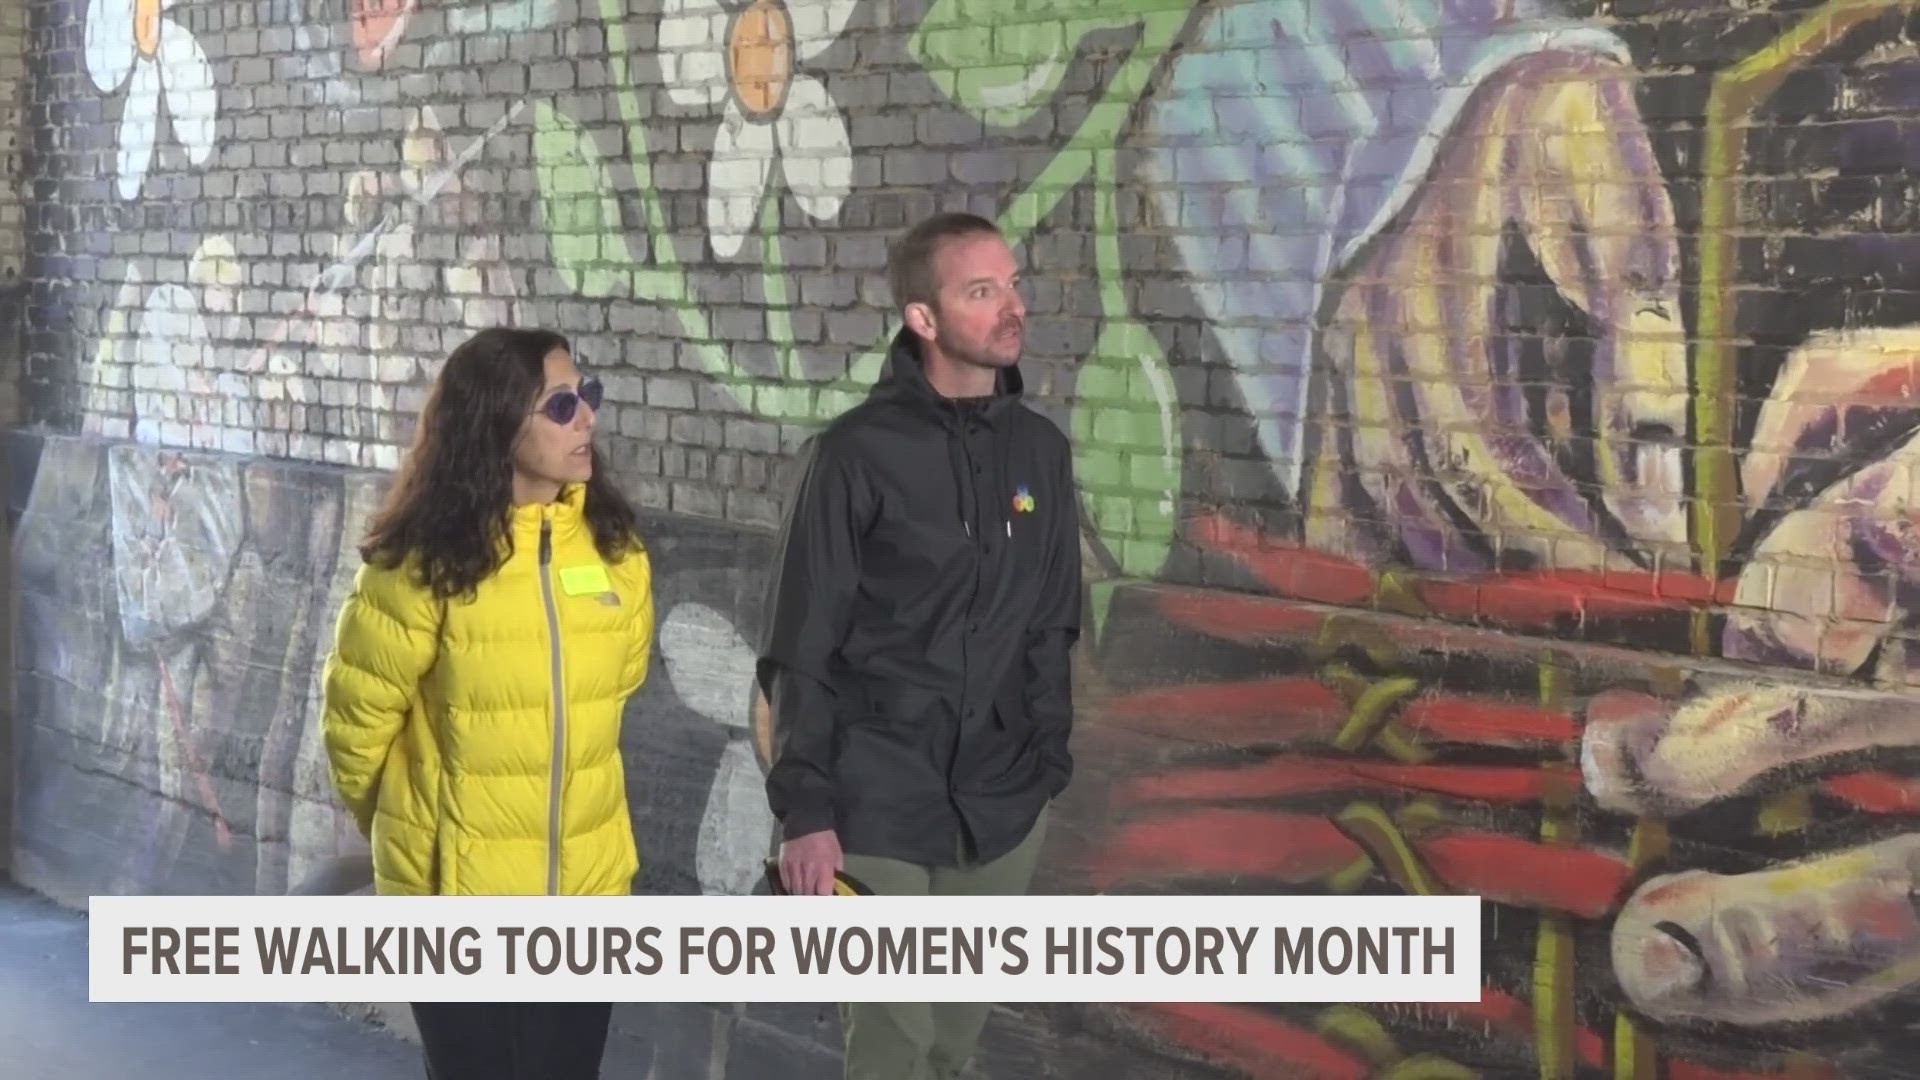 Grand Rapids is offering a walking tour of "Women's Way" for Women's History Month.